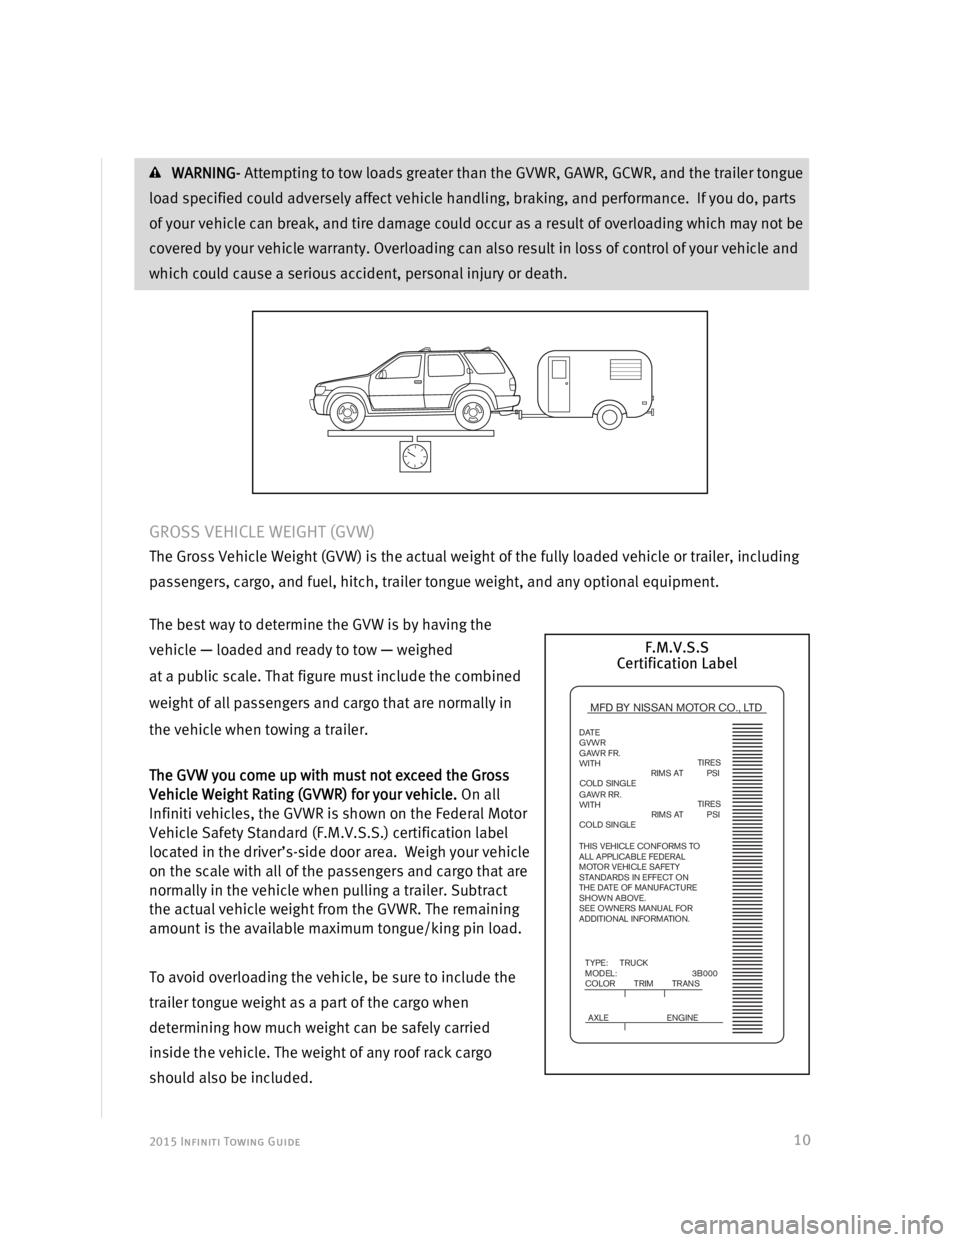 INFINITI QX70 2015  Towing Guide  2015 Infiniti Towing Guide  
 
 
10
 WARNING- Attempting to tow loads greater than the GVWR, GAWR, GCWR, and the trailer tongue 
load specified could adversely affect vehicle handling, braking, and p